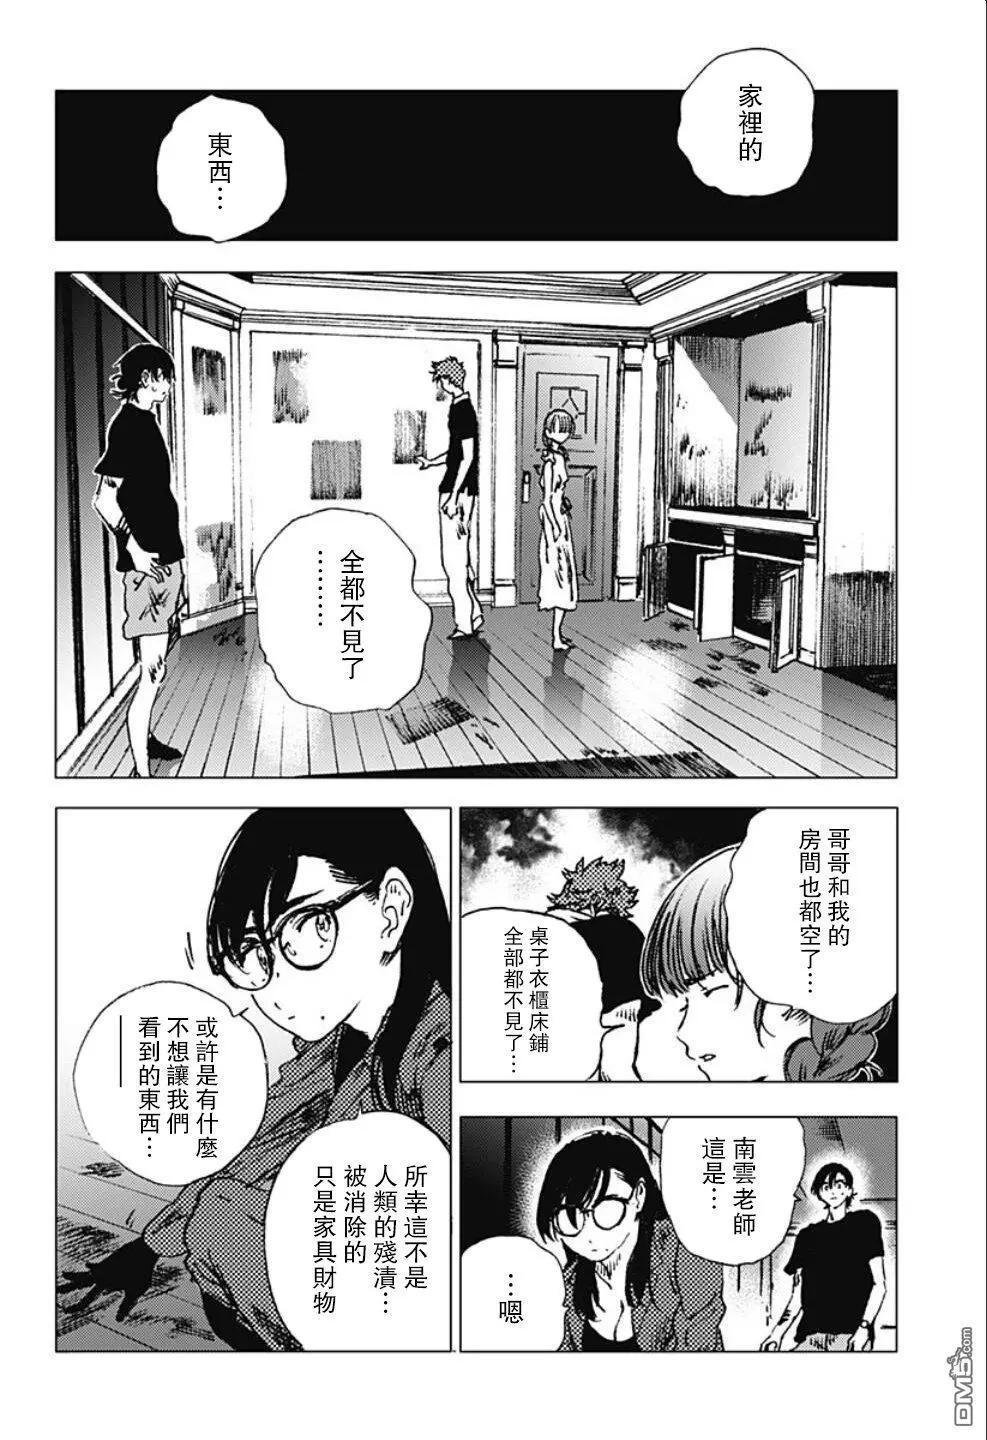 Summer time rendering - 第84話 - 2